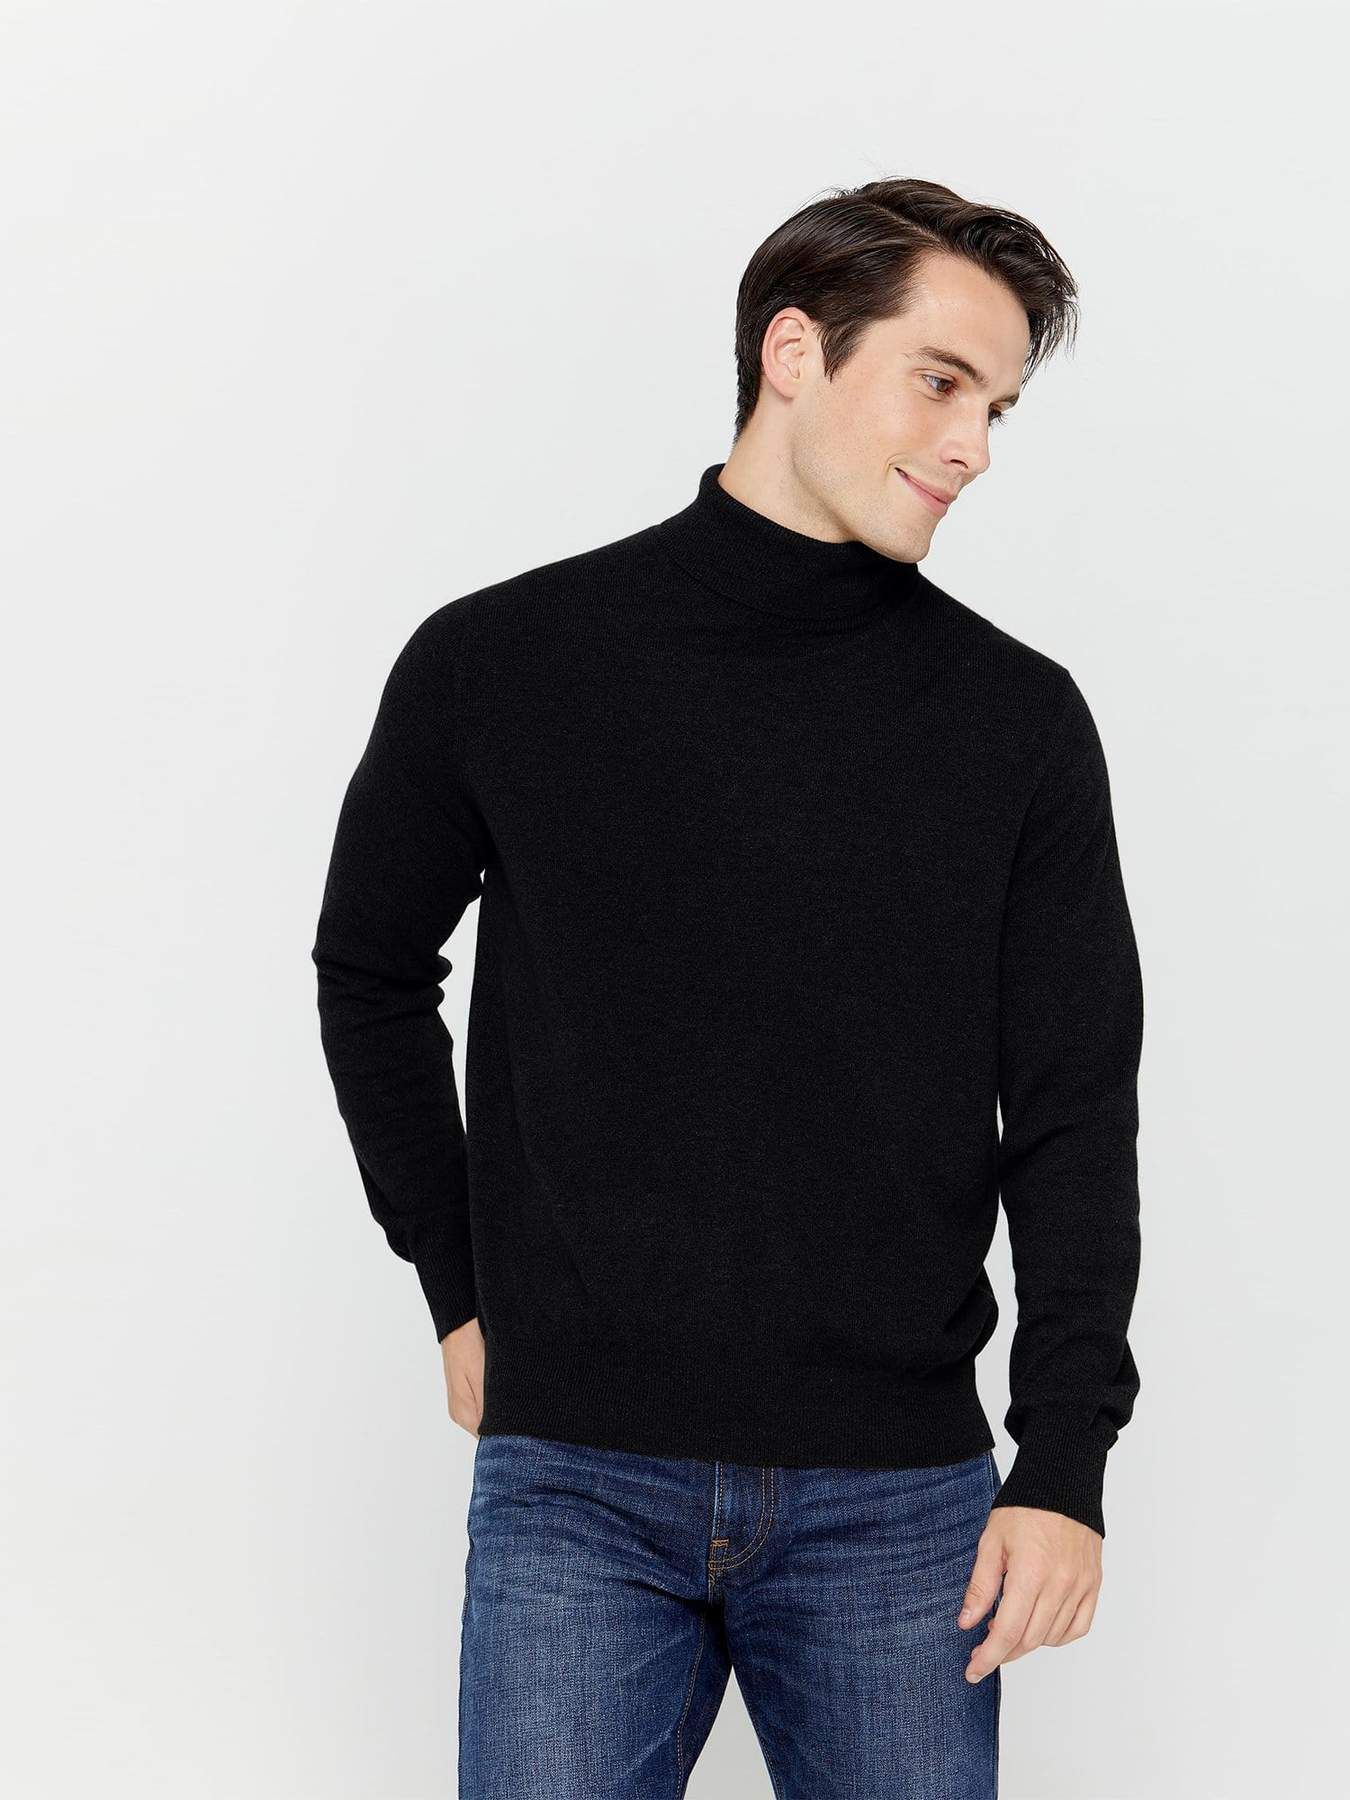 Sweater Men O Neck Mens Sweaters Slim Fit Pullover Men Knitwear Male Clothing